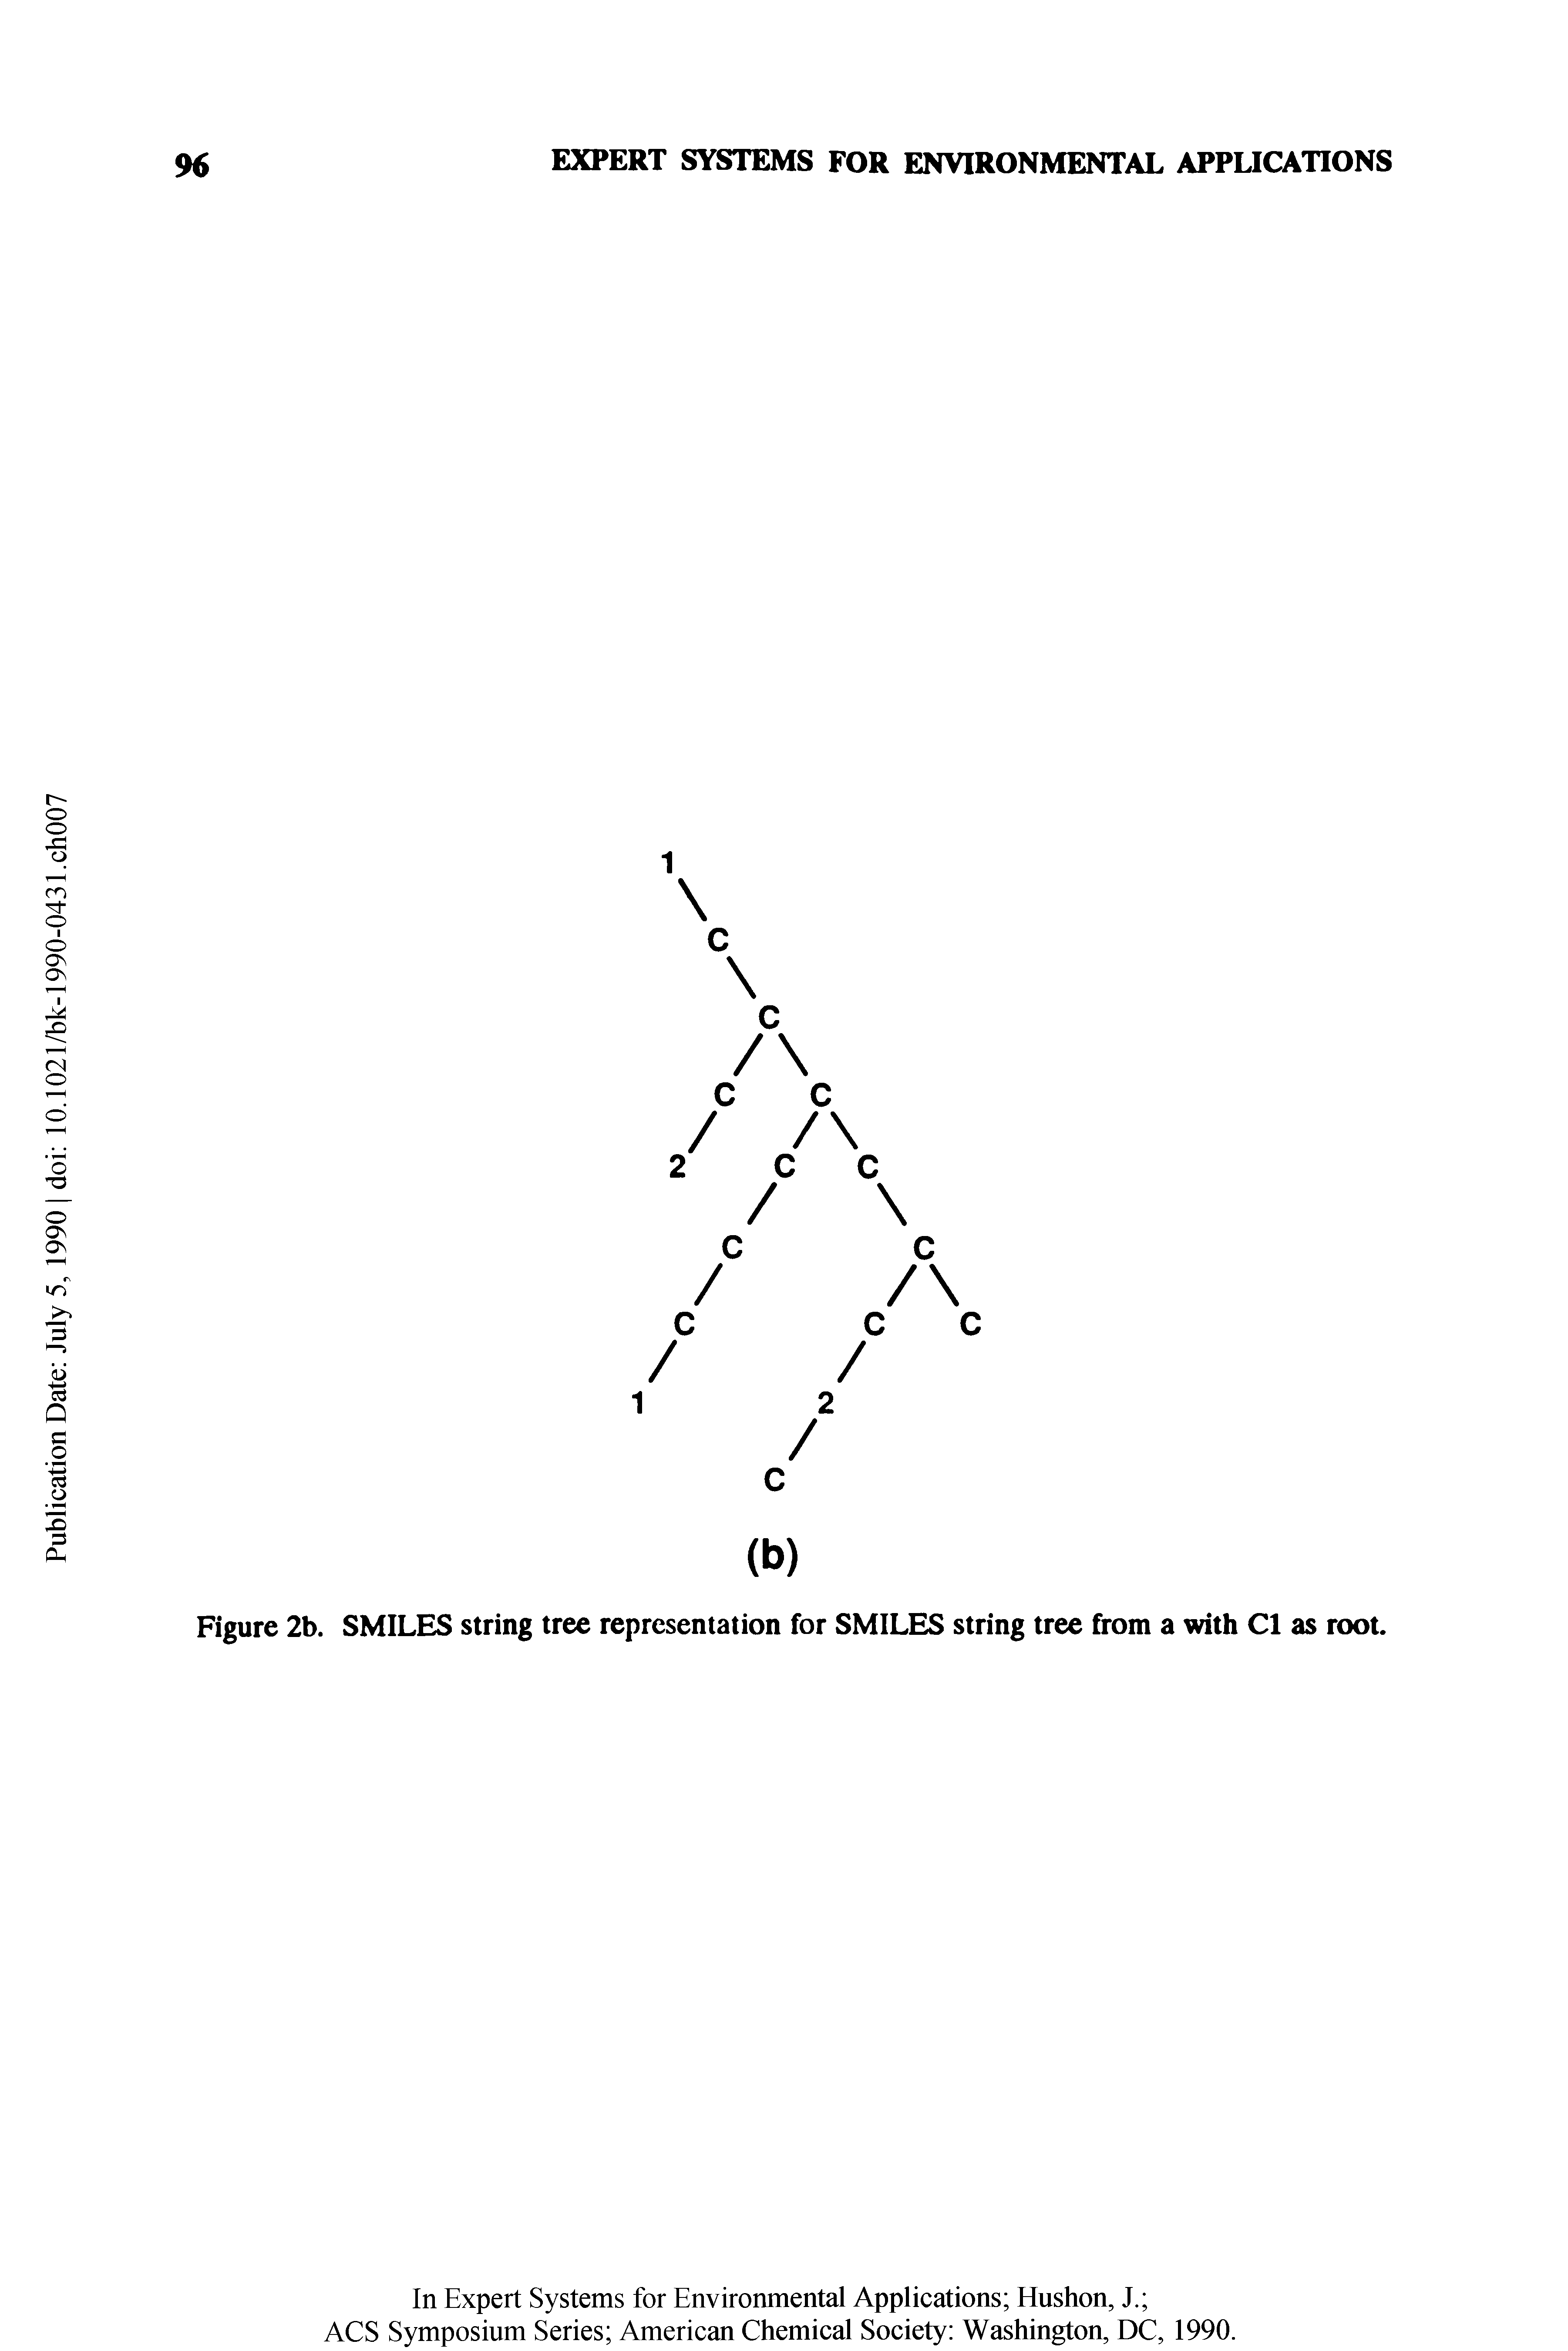 Figure 2b. SMILES string tree representation for SMILES string tree from a with Cl as root.